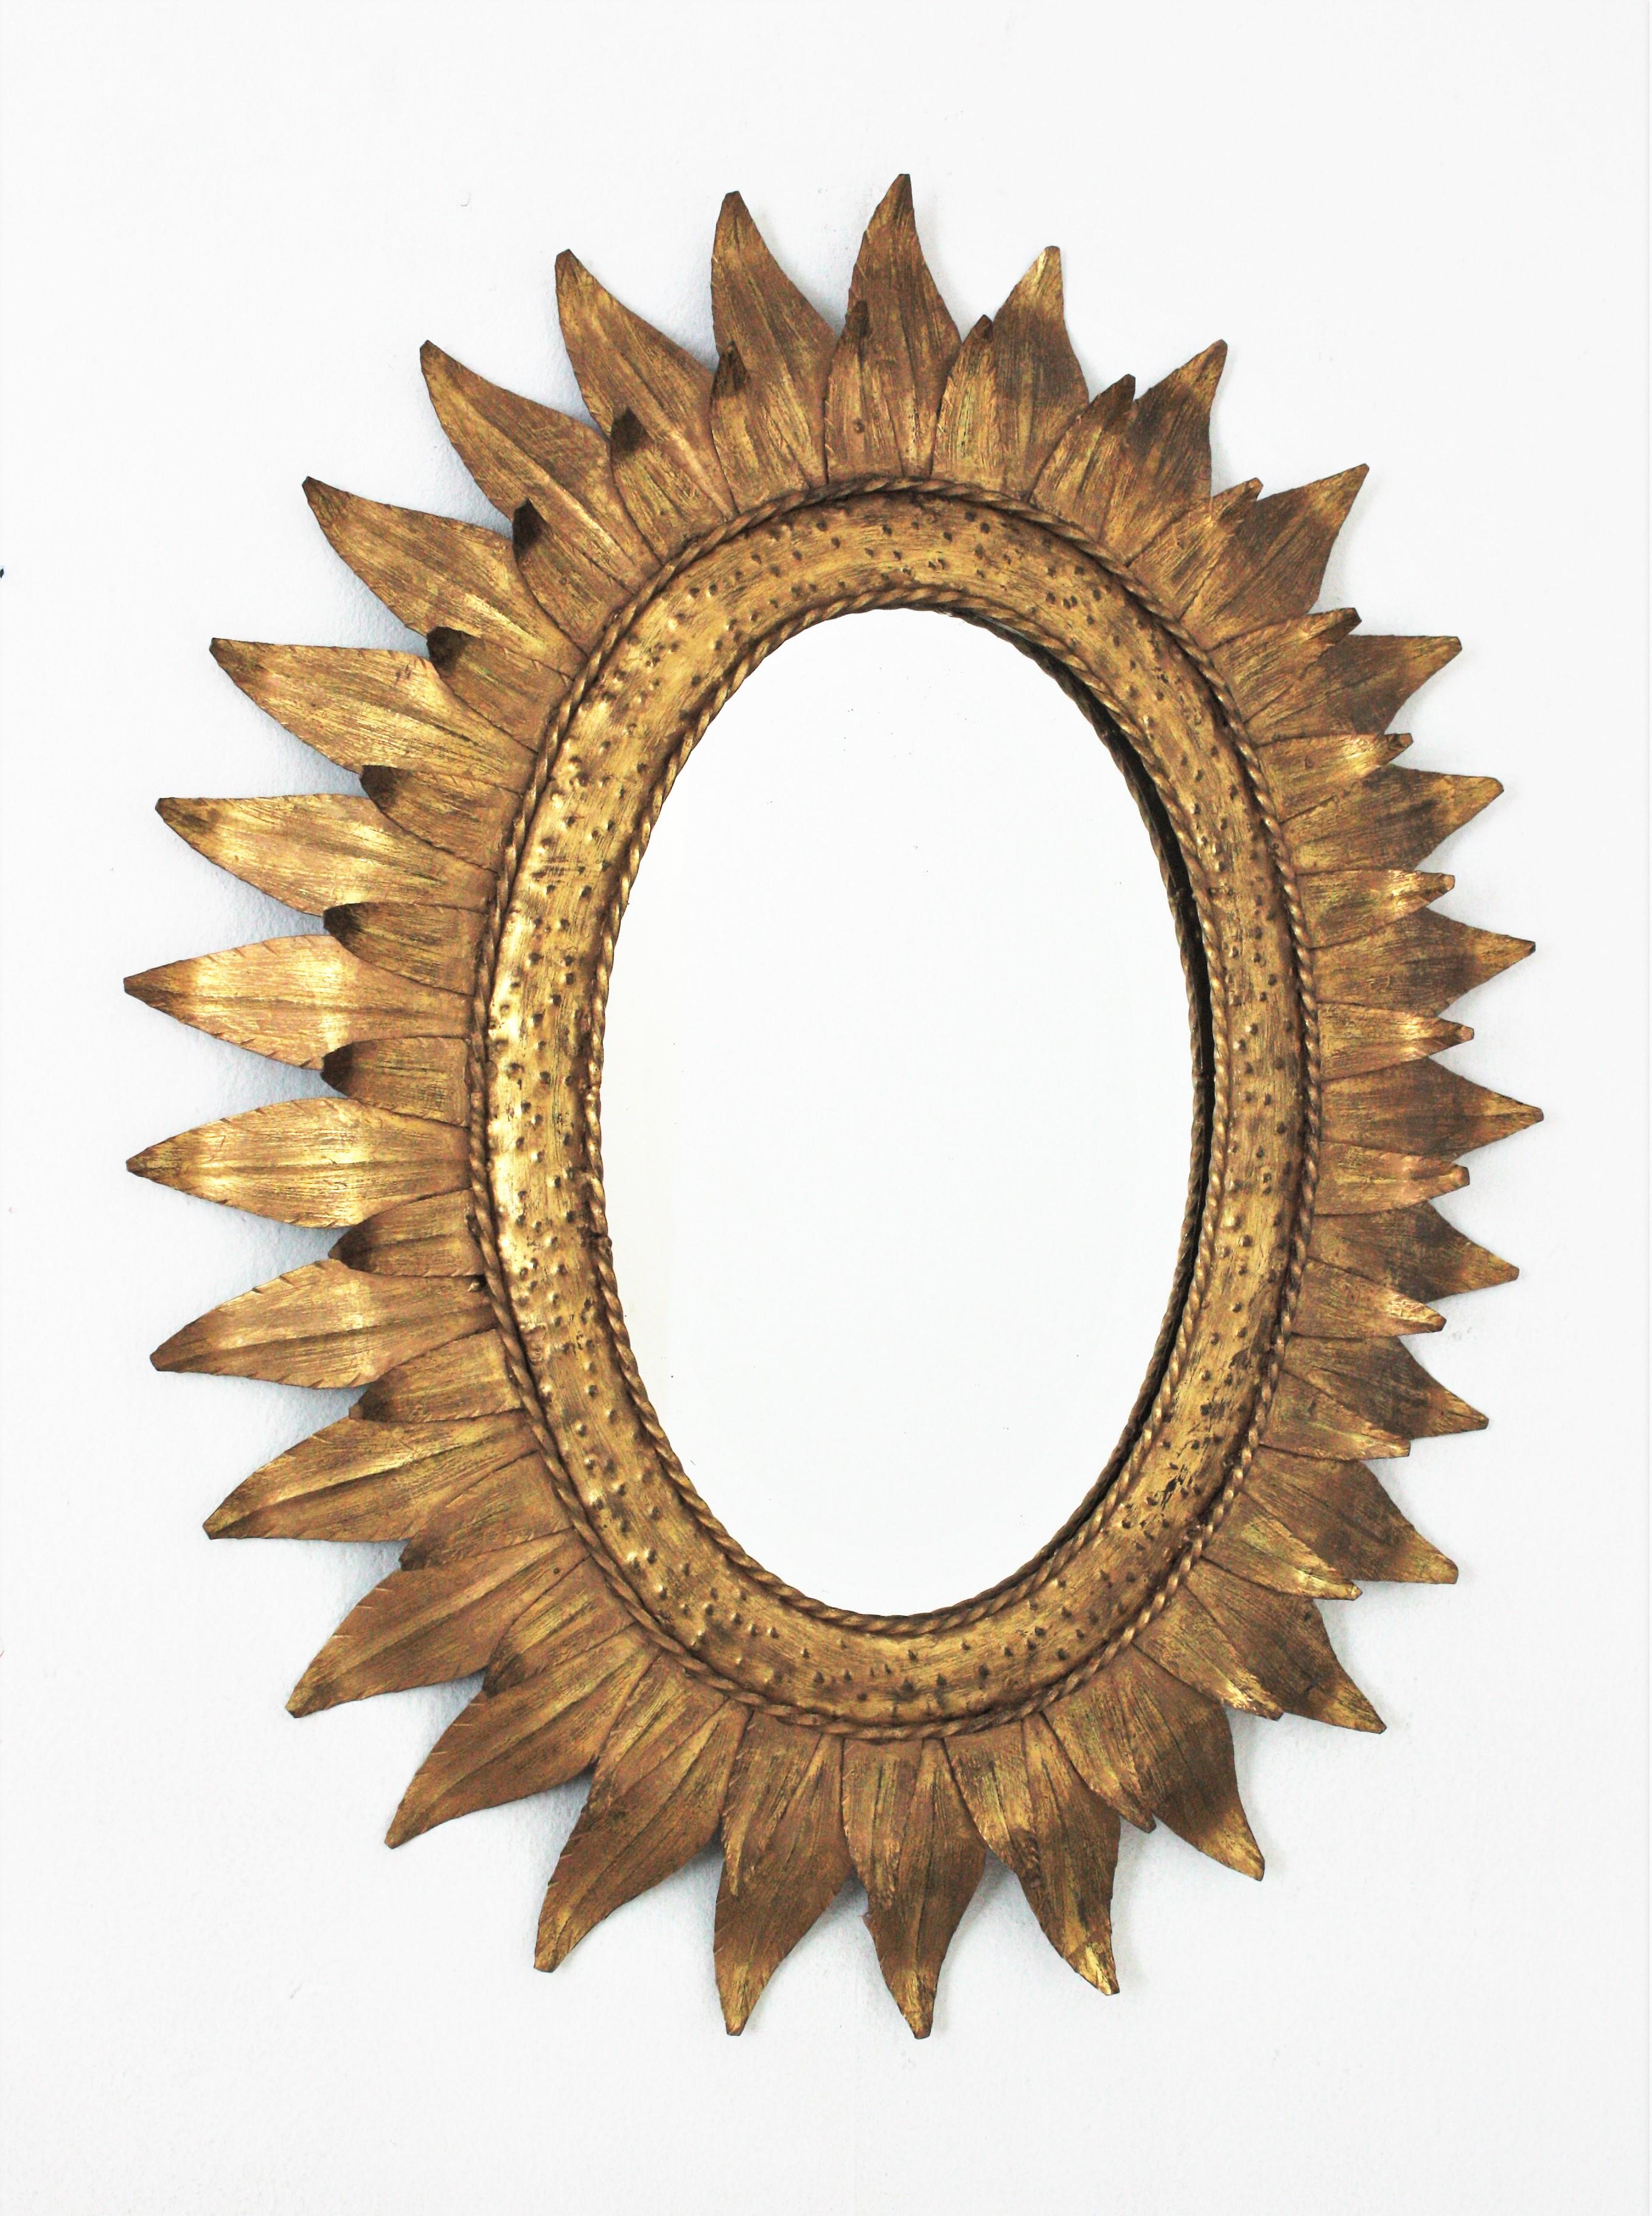 Oval sunburst mirror, Gilt iron. France, 1950s
This hand-hammered iron sunburst wall mirror features a double leafed oval frame heavily adorned by the hammer marks at the central part and twisting iron ropes surrounding the glass. It has a nice